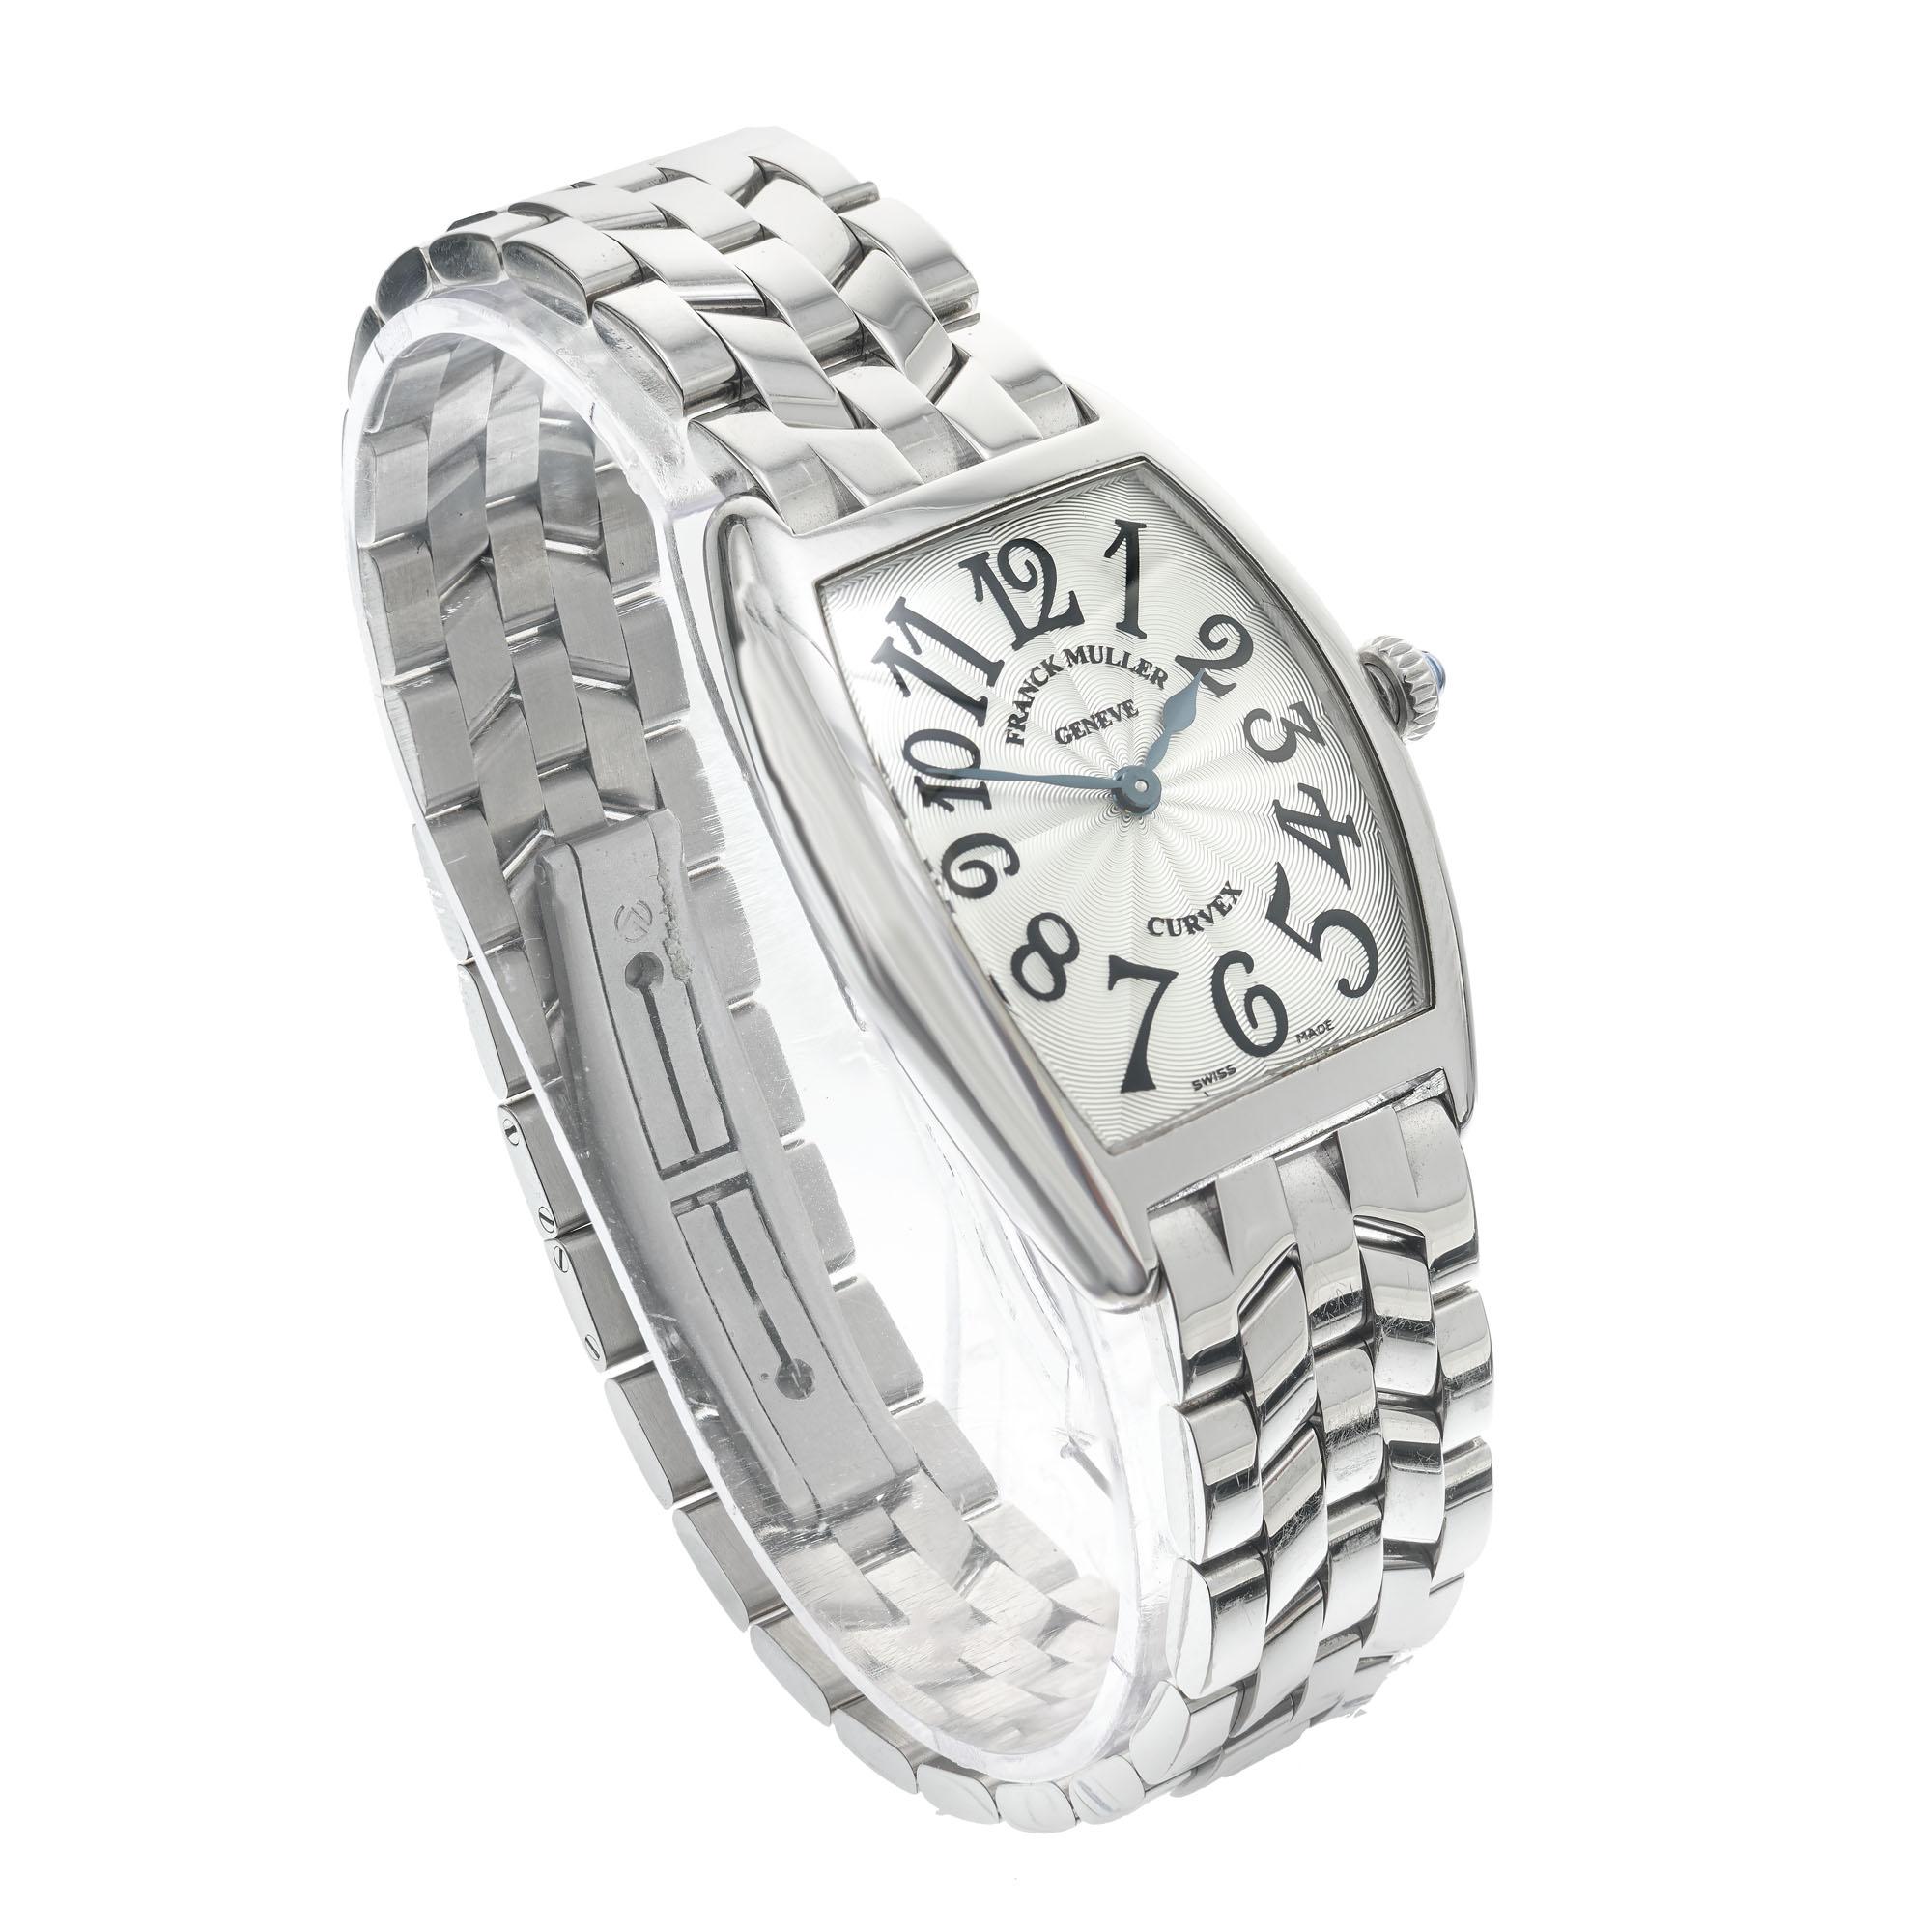 Franck Muller lady's stainless steel Curvex wristwatch 

Stainless steel
Bracelet length: 7 5/8 inches
Width without crown: 24.88mm
Width with crown: 27.87mm
Bracelet width at case: 14.08mm 
Case thickness: 7.58mm
Bracelet: Stainless